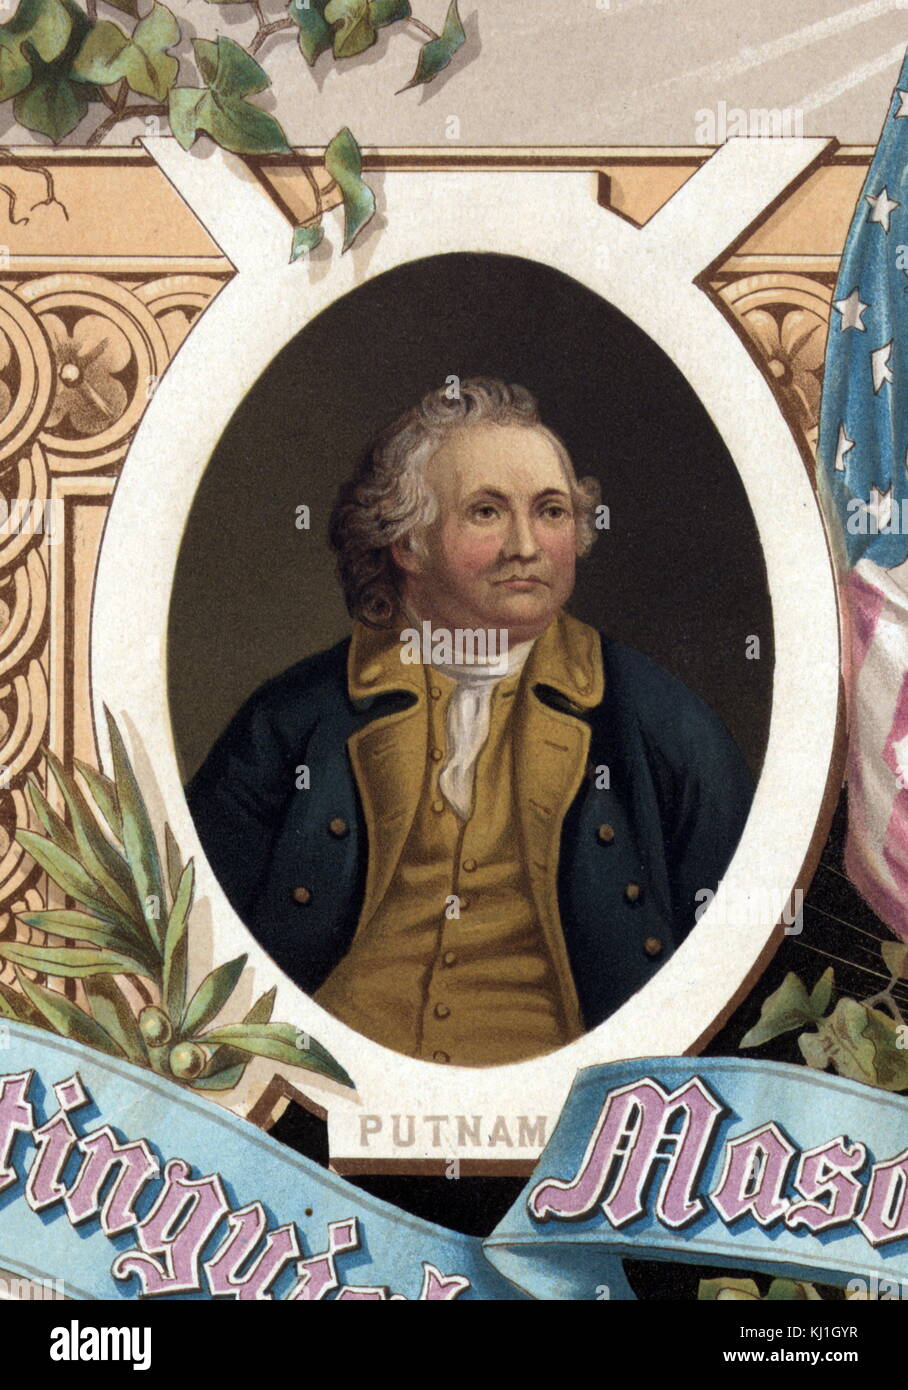 Israel Putnam (January 7, 1718 – May 29, 1790) was an American army general officer, popularly known as Old Put, who fought with distinction at the Battle of Bunker Hill (1775) during the American Revolutionary War (1775–1783). His reckless courage and fighting spirit became known far beyond Connecticut's borders through the circulation of folk legends in the American colonies and states celebrating his exploits.. Taken from an illustration of 1800 titled 'Distinguished masons of the revolution' Stock Photo